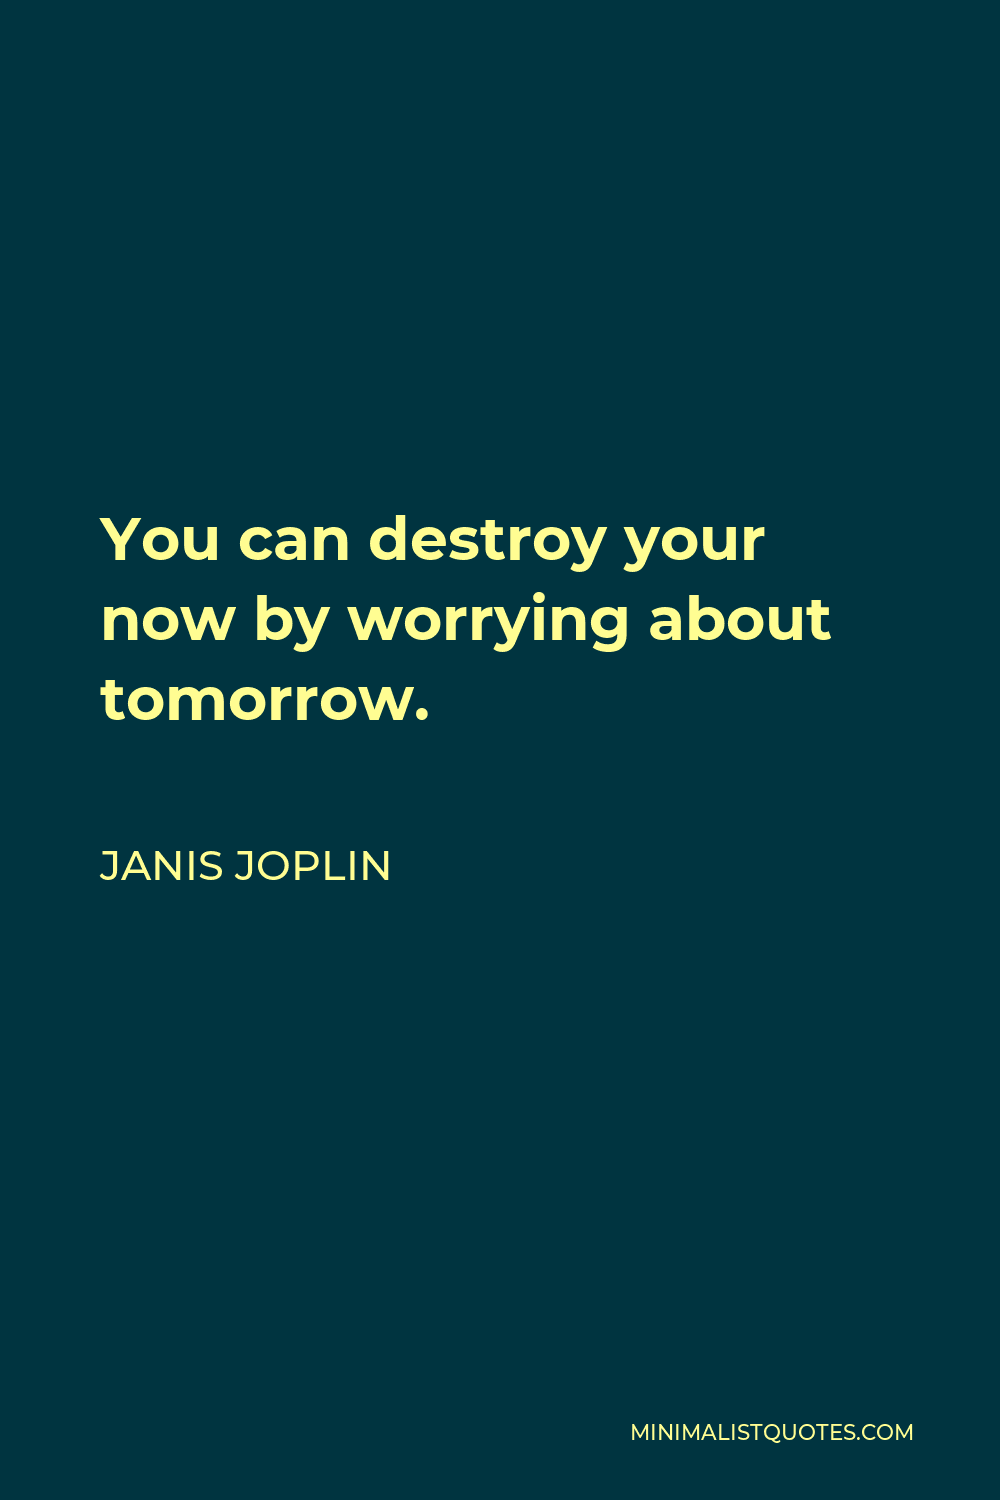 Janis Joplin Quote - You can destroy your now by worrying about tomorrow.